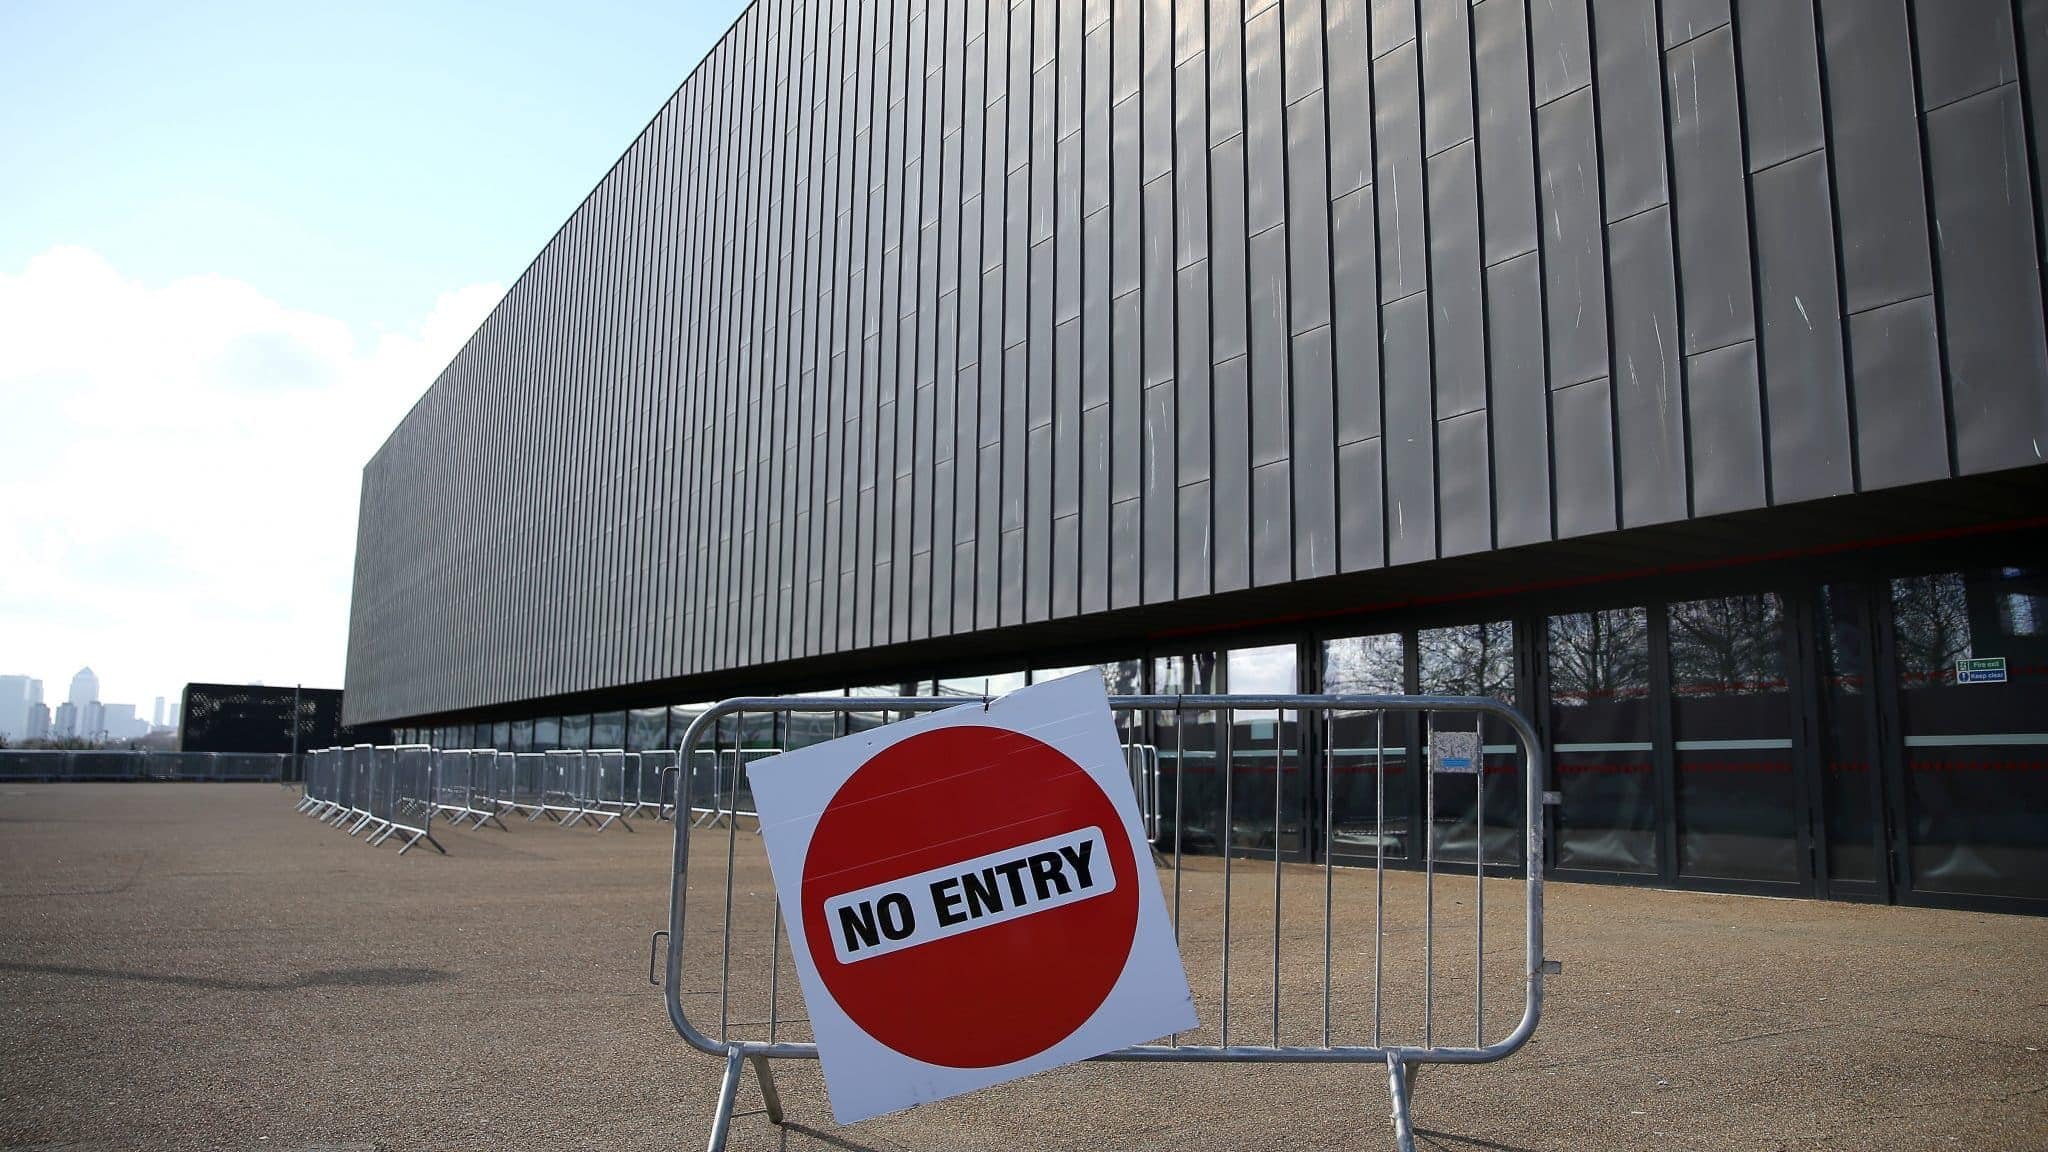 LONDON, ENGLAND - MARCH 16: A No entry sign is seen outside the venue as the event is placed behind closed doors due to the Coronavirus Covid-19 pandemic on Day Three of the Road to Tokyo European Boxing Olympic Qualifying Event at Copper Box Arena on March 16, 2020 in London, England.